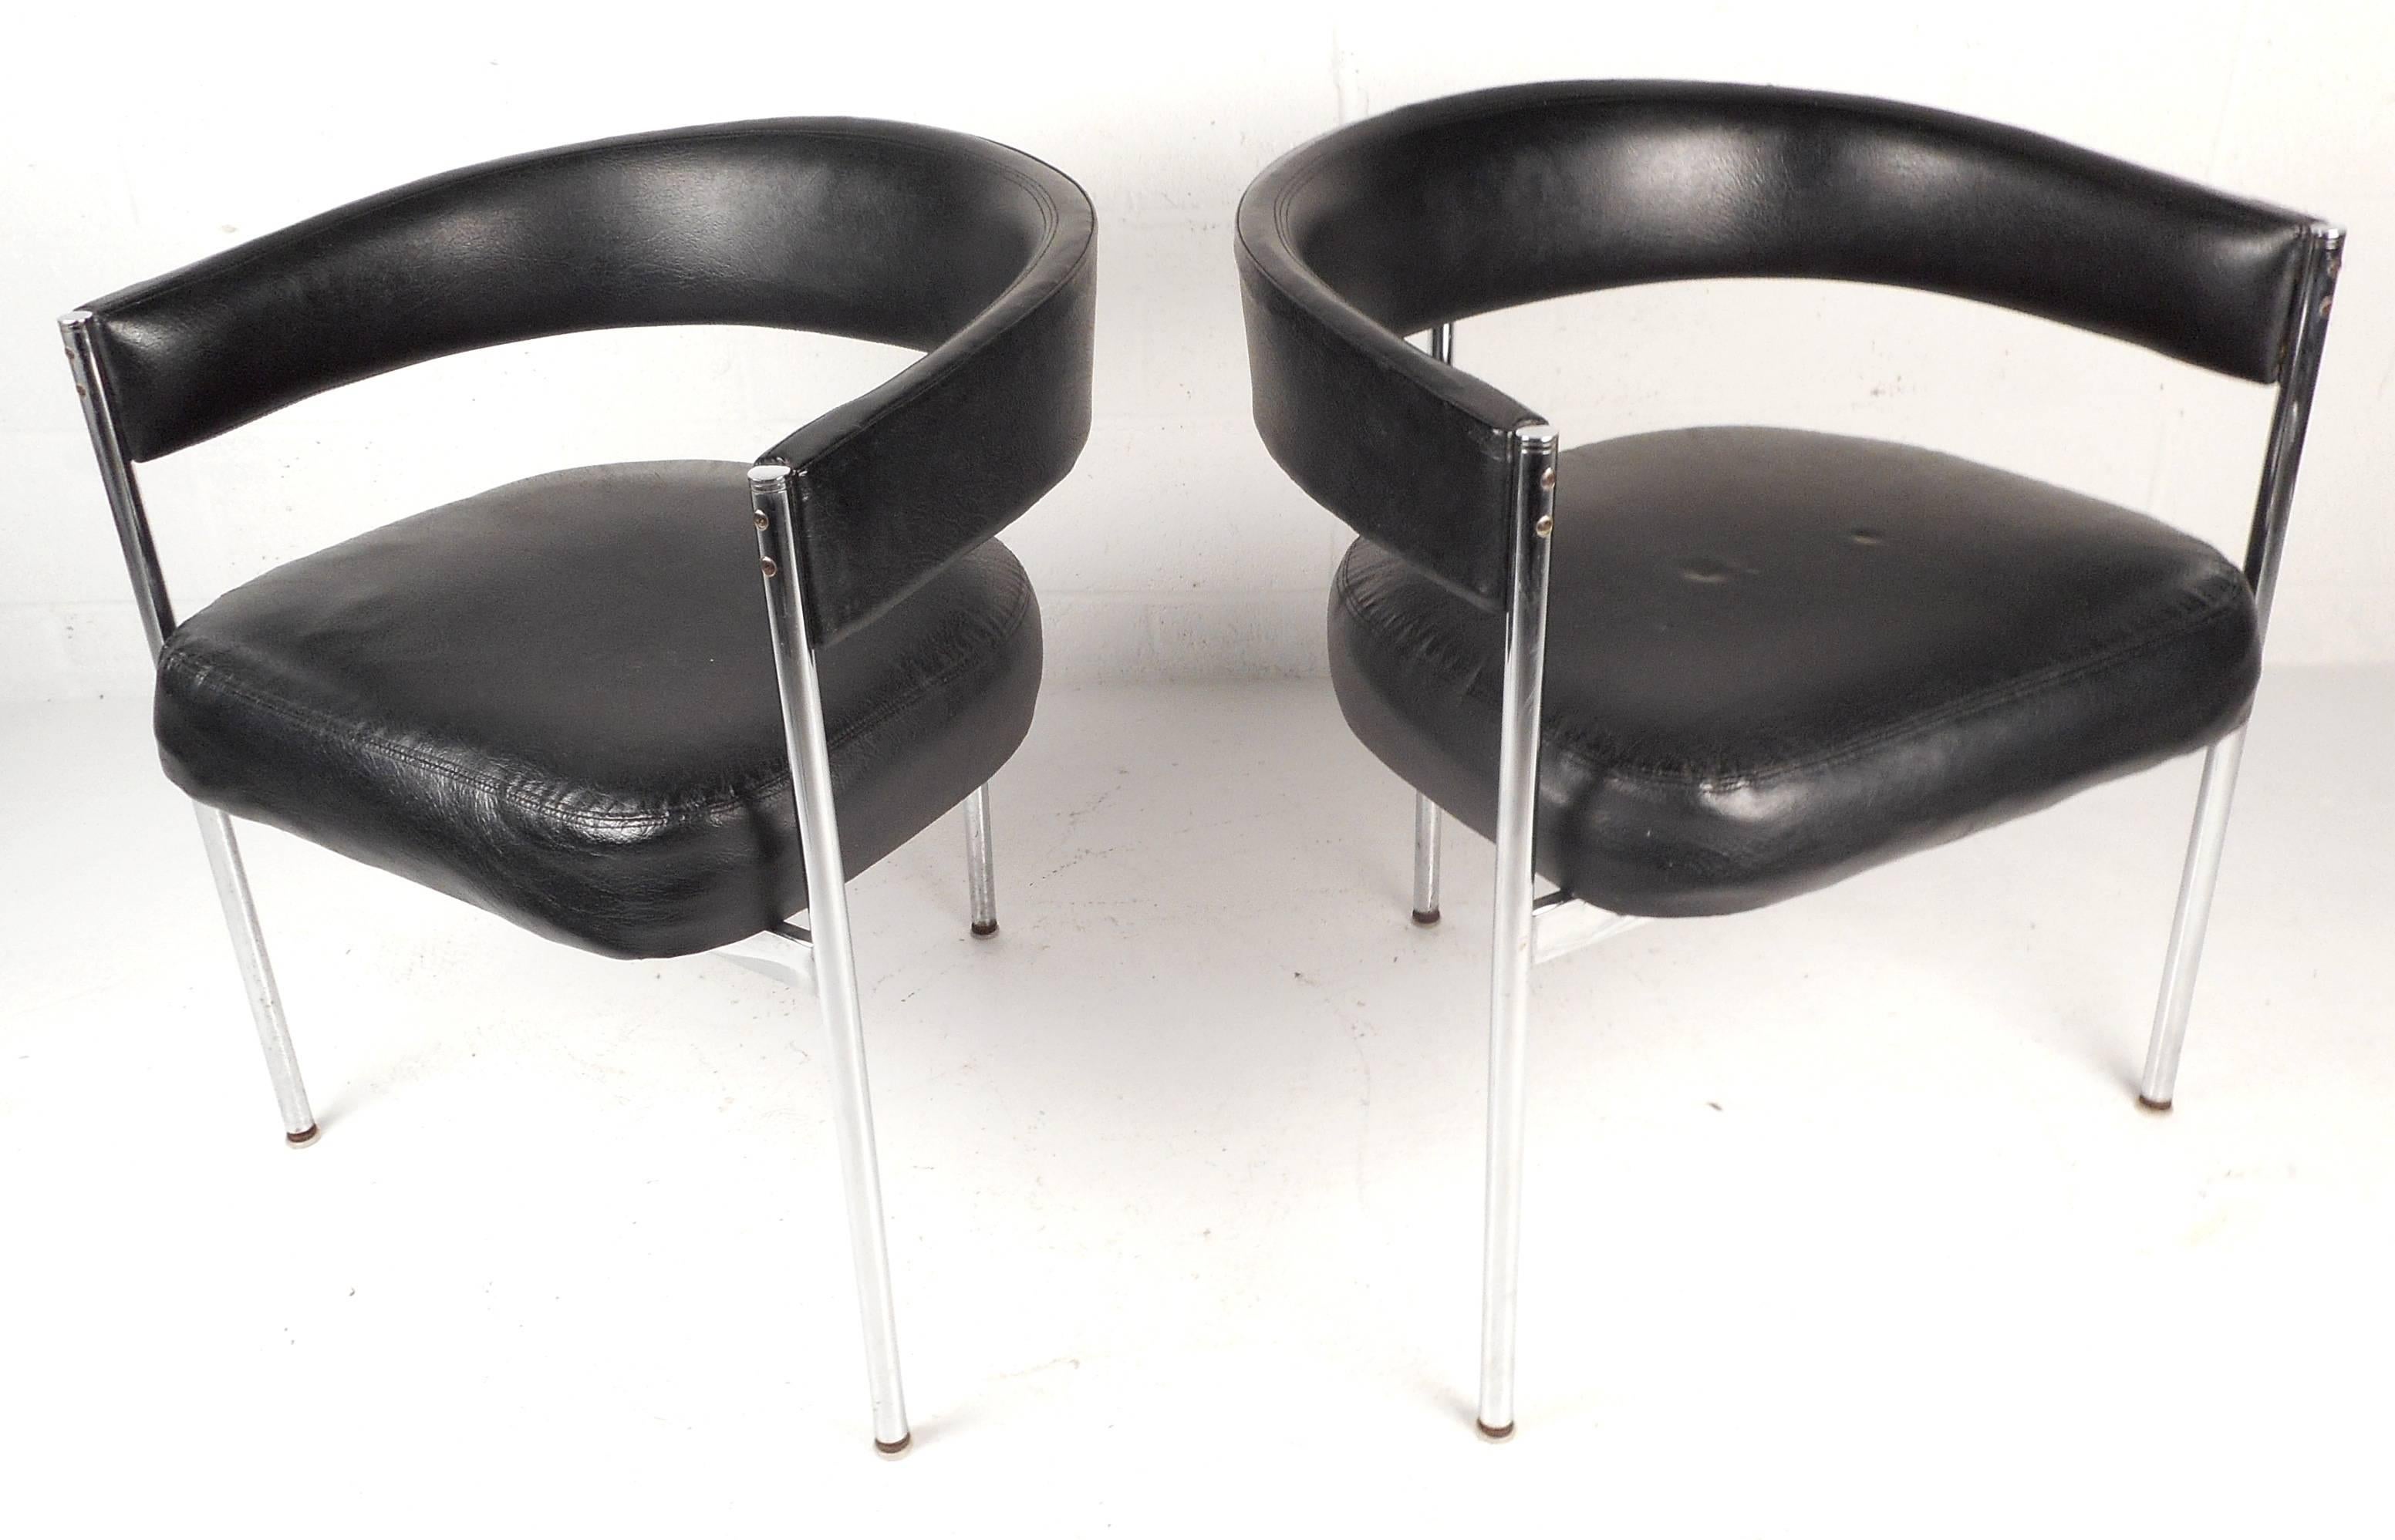 Divine pair of Mid-Century chrome and vinyl chairs with a three legged frame and a comfortable wrap around barrel backrest. The unique design was made by, 